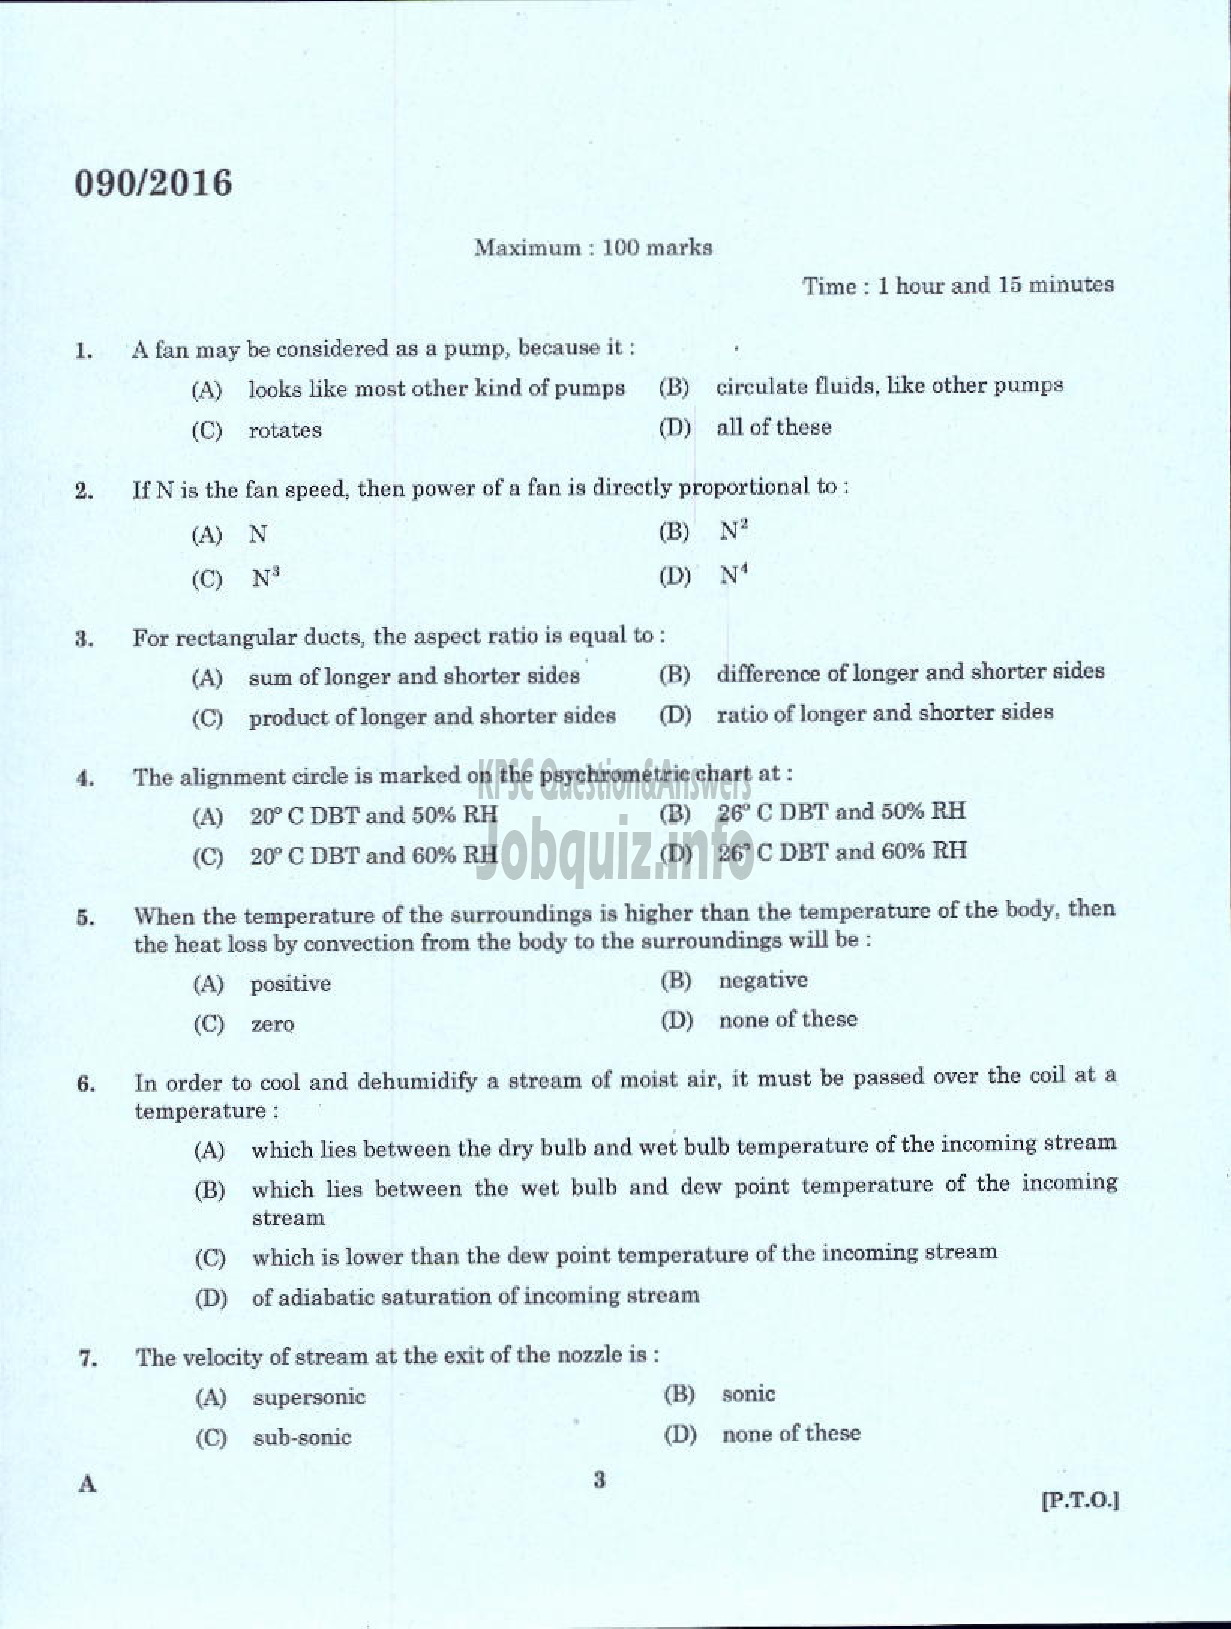 Kerala PSC Question Paper - VOCATIONAL INSTRUCTOR IN REFRIGERATION AND AIR CONDITIONING VHSE-1